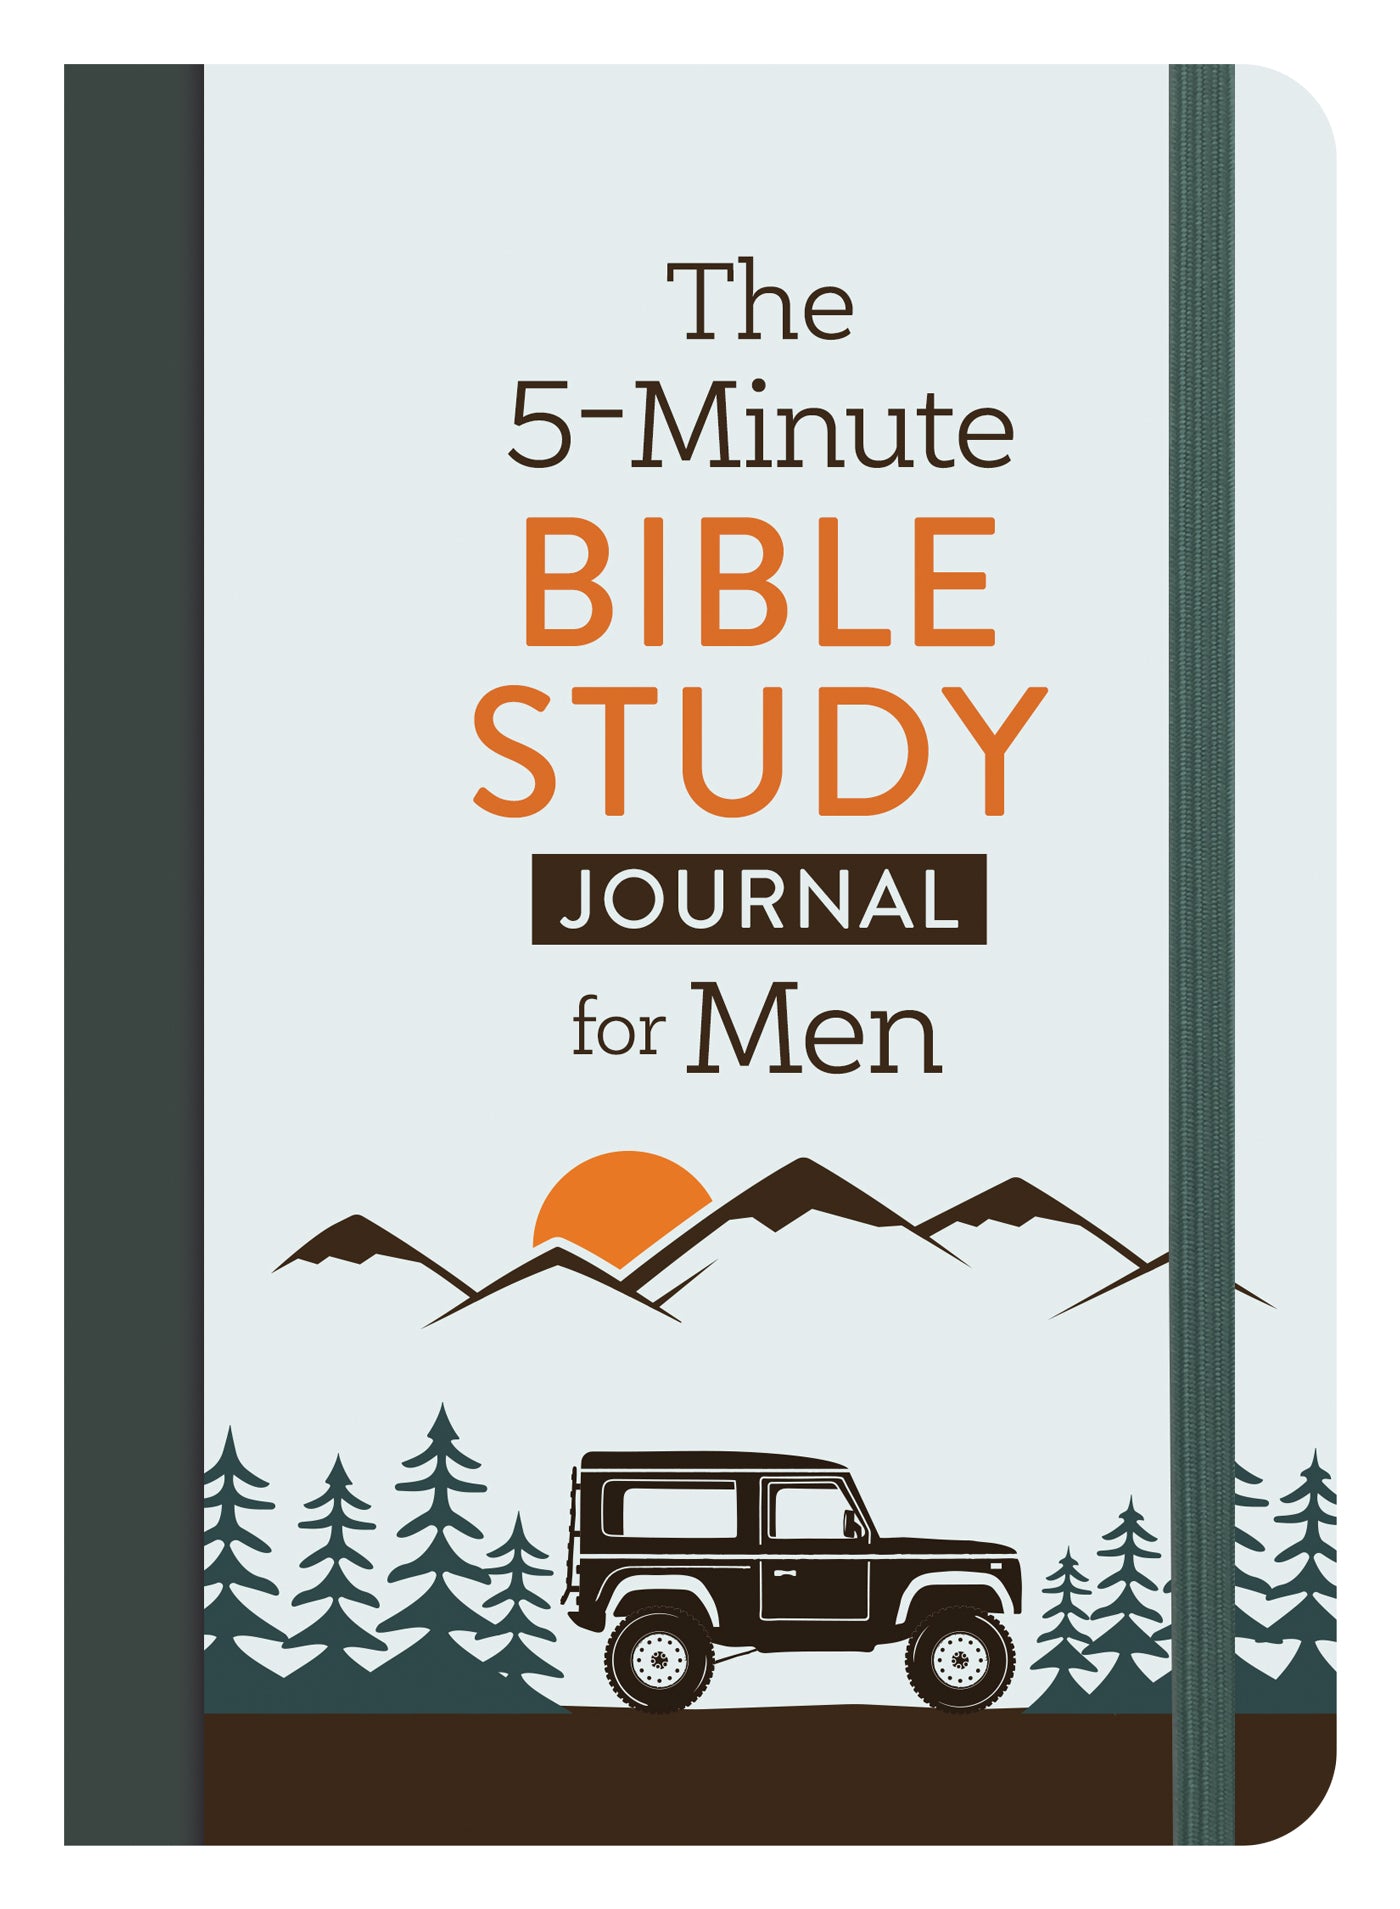 The 5-Minute Bible Study Journal for Men - Mercantile Mountain